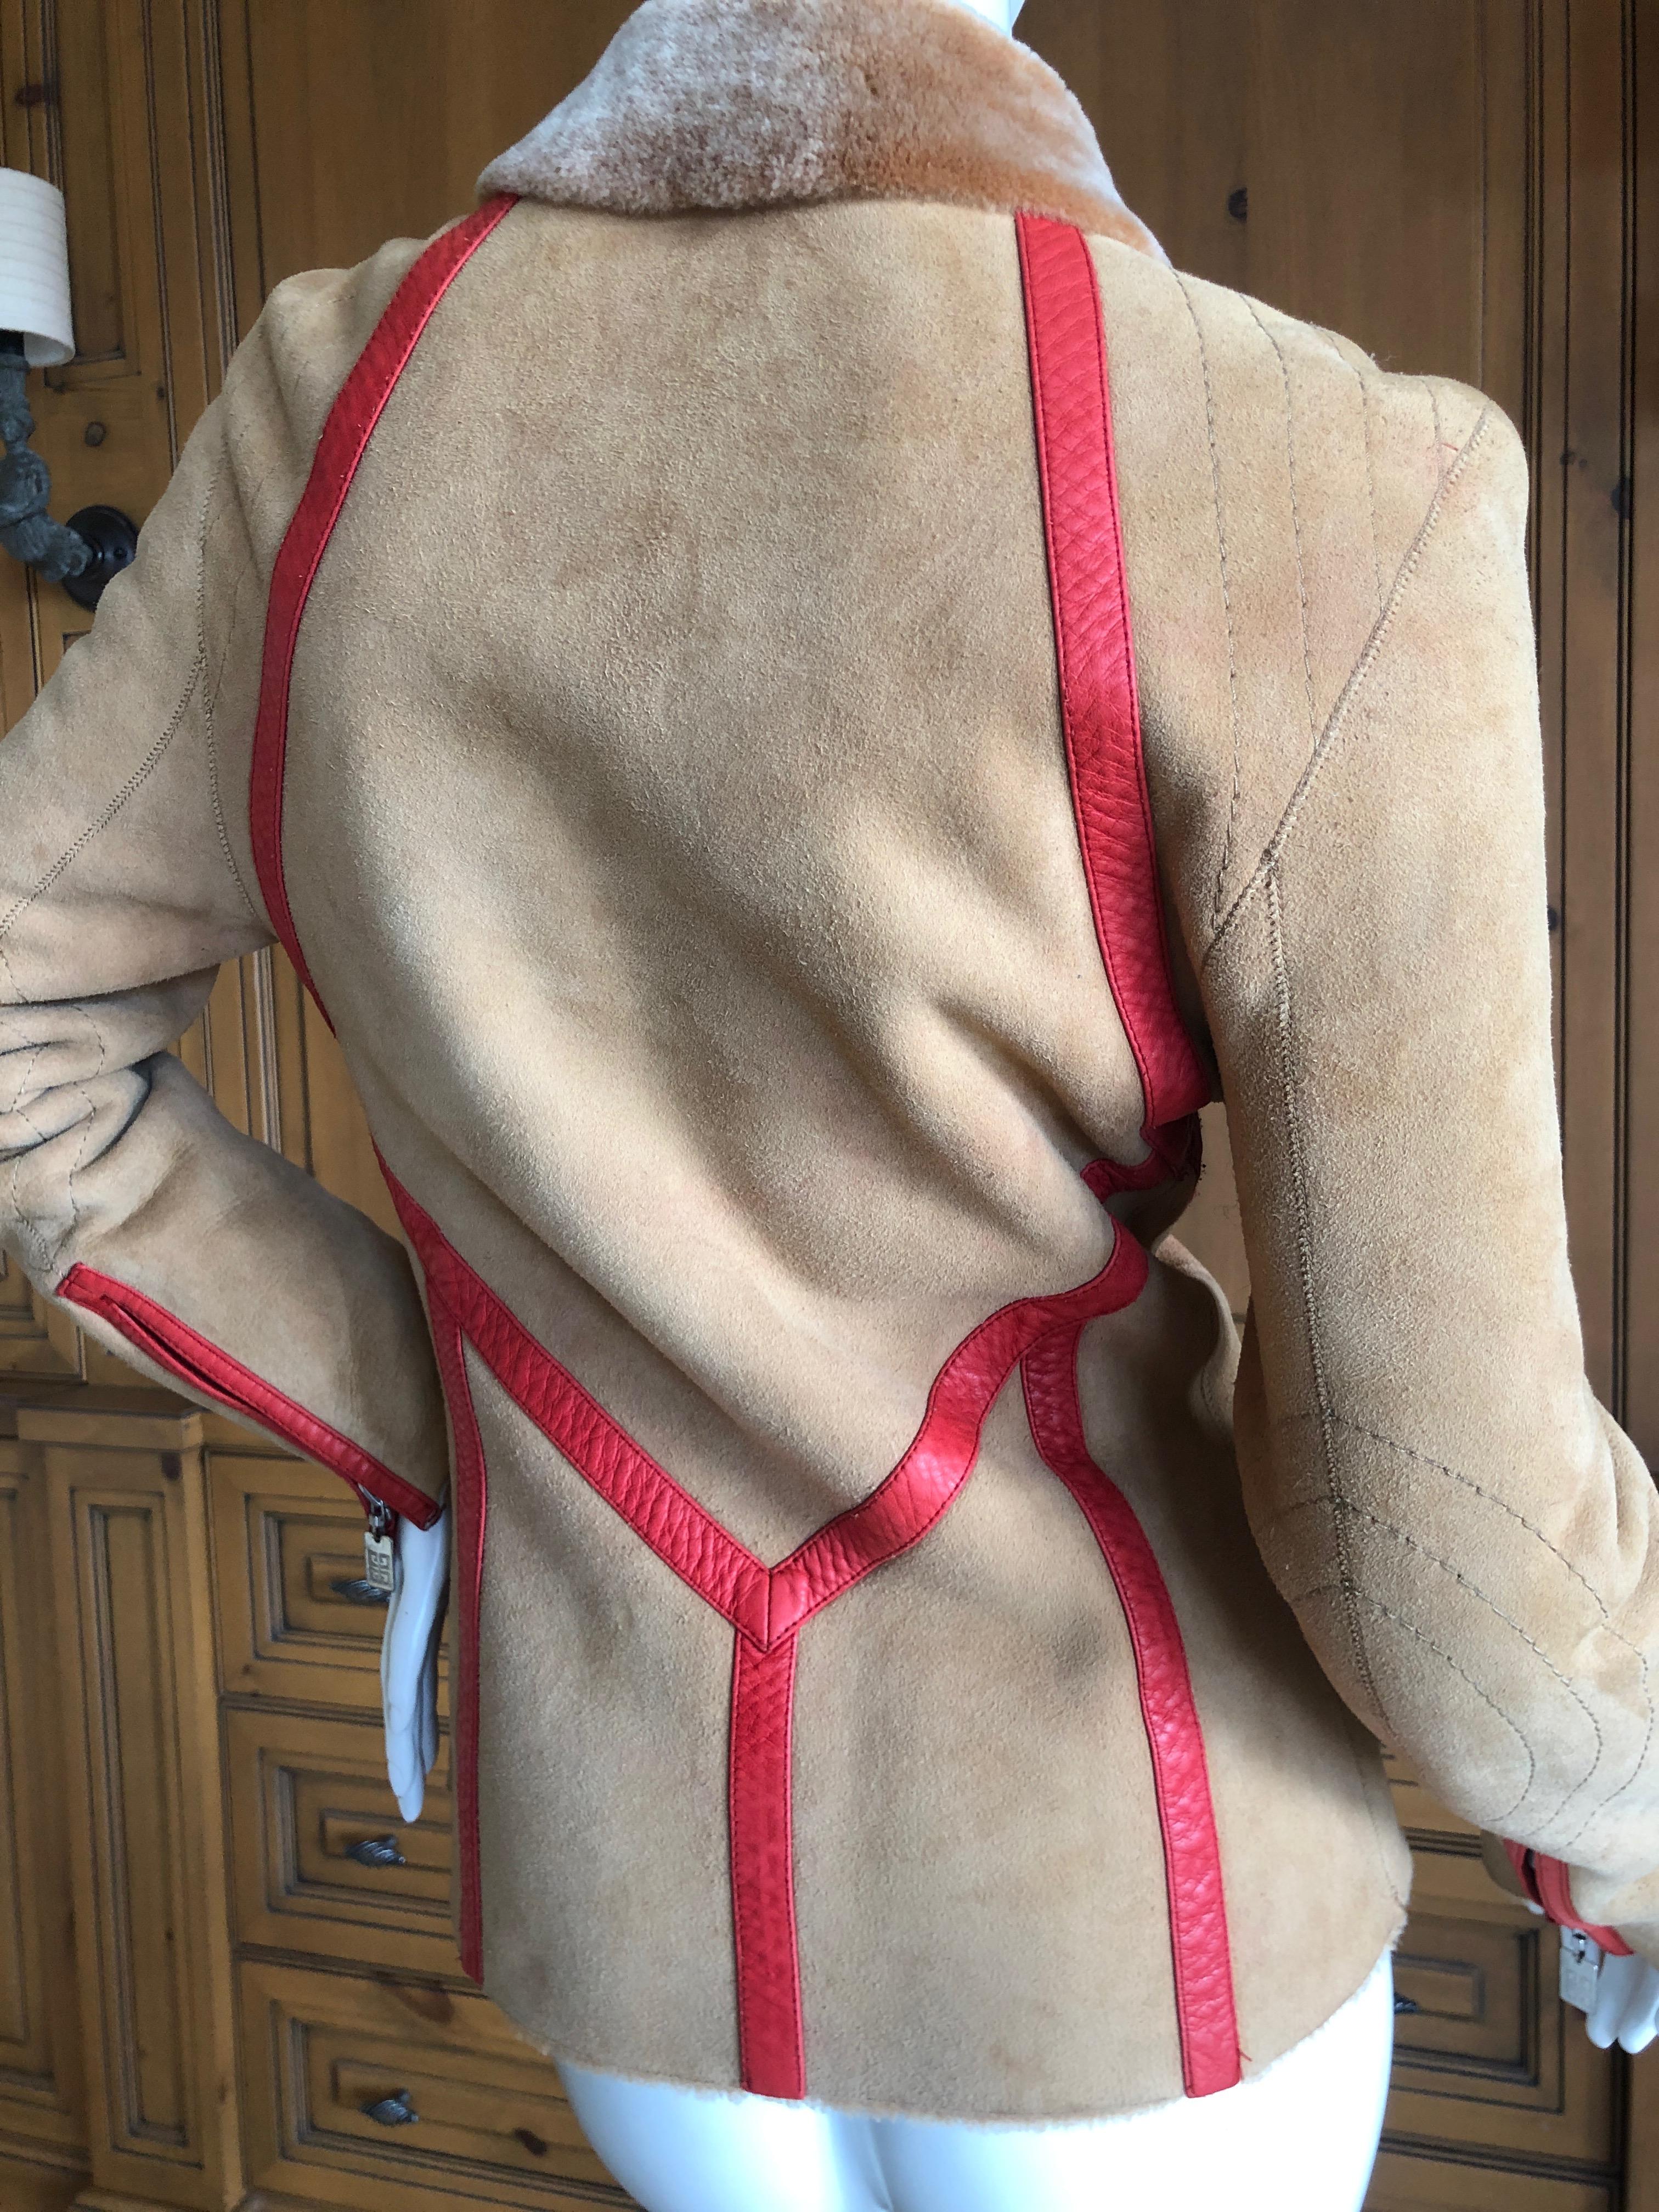 Givenchy Haute Couture A/W 1998 by Alexander McQueen Red Trim Shearling Jacket For Sale 3